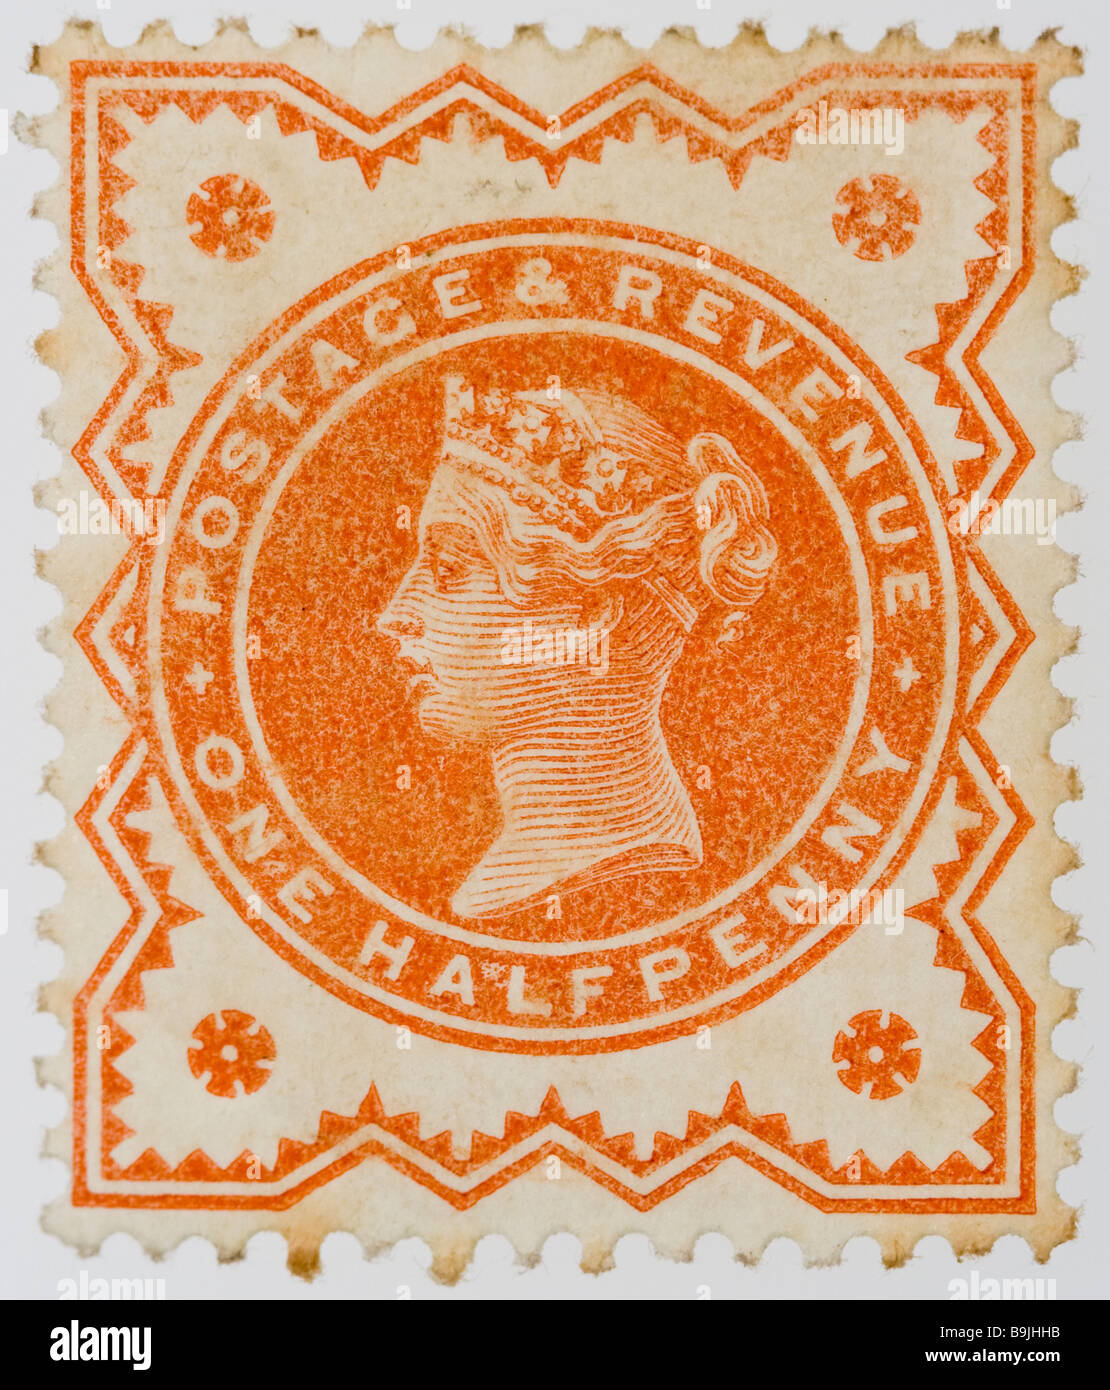 Close up of ½d, one half penny orange Victorian British Postal stamp on white background issued between 1887-1900, part of the 'Jubilee Issue'. Mint Stock Photo